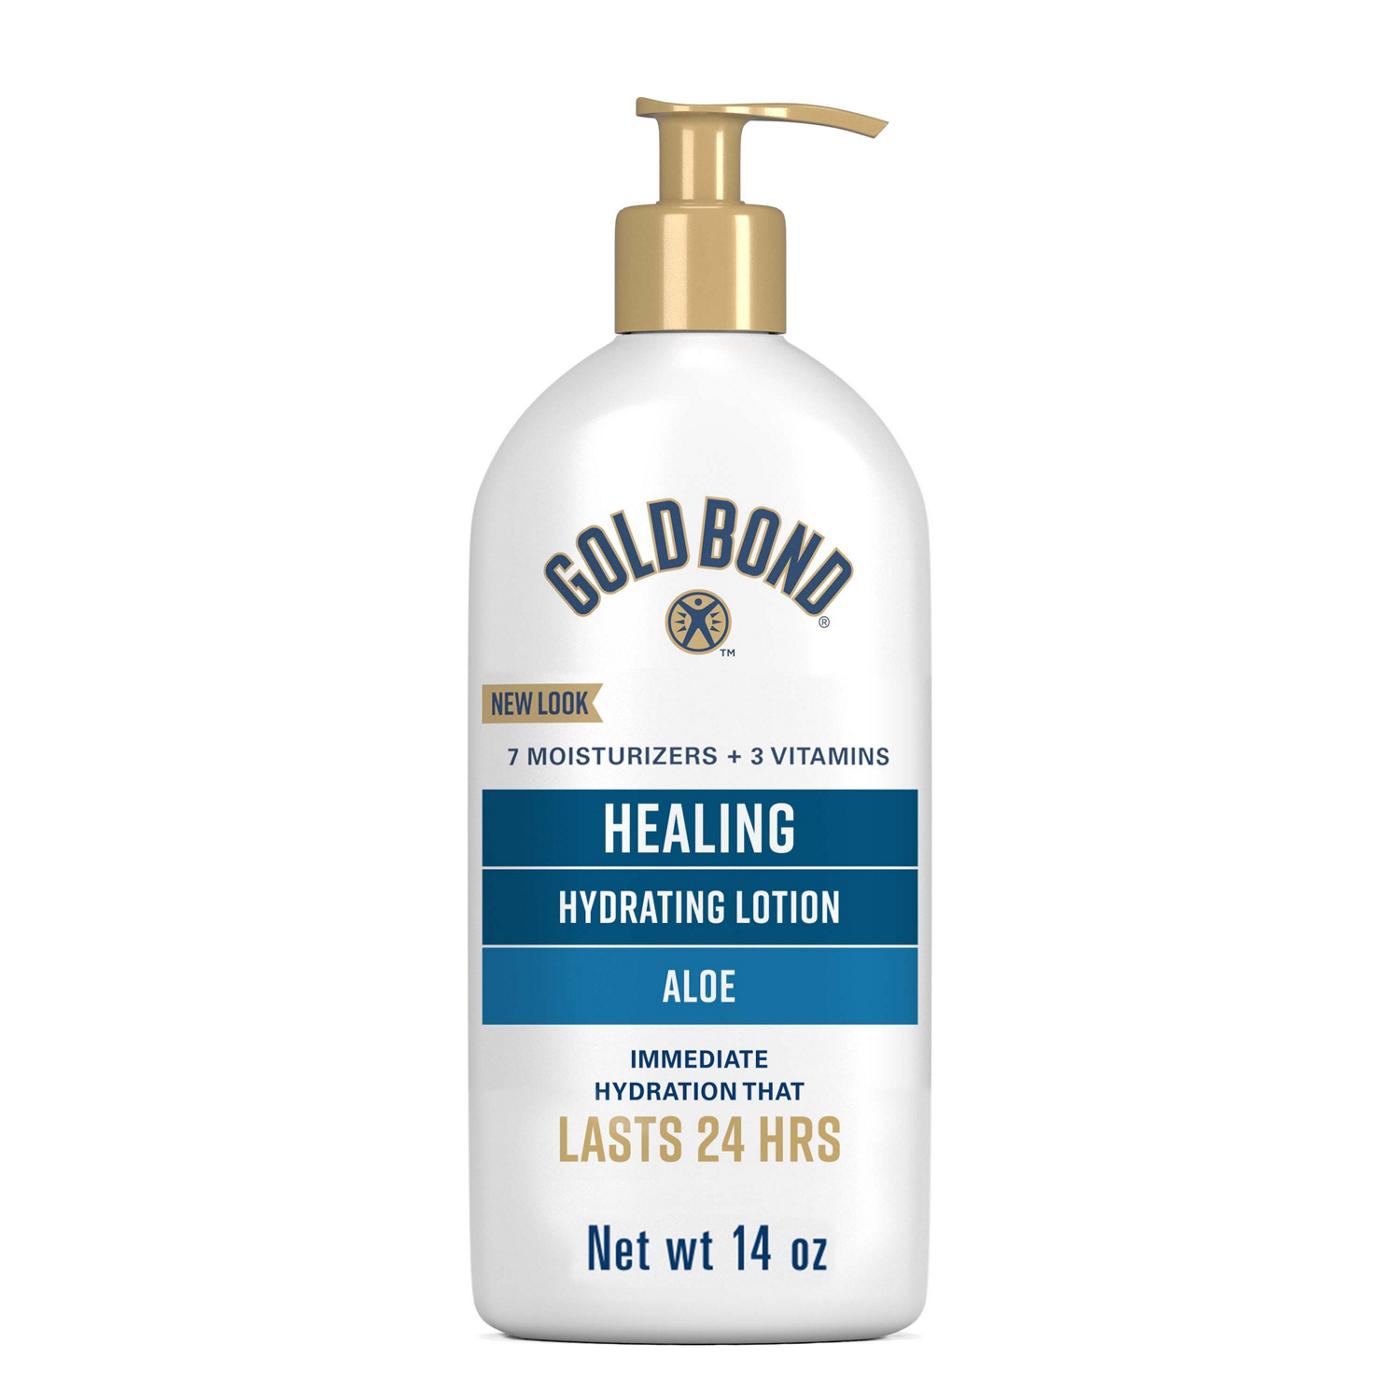 Gold Bond Healing Hydrating Lotion, With Aloe, 24HR Hydration; image 1 of 5